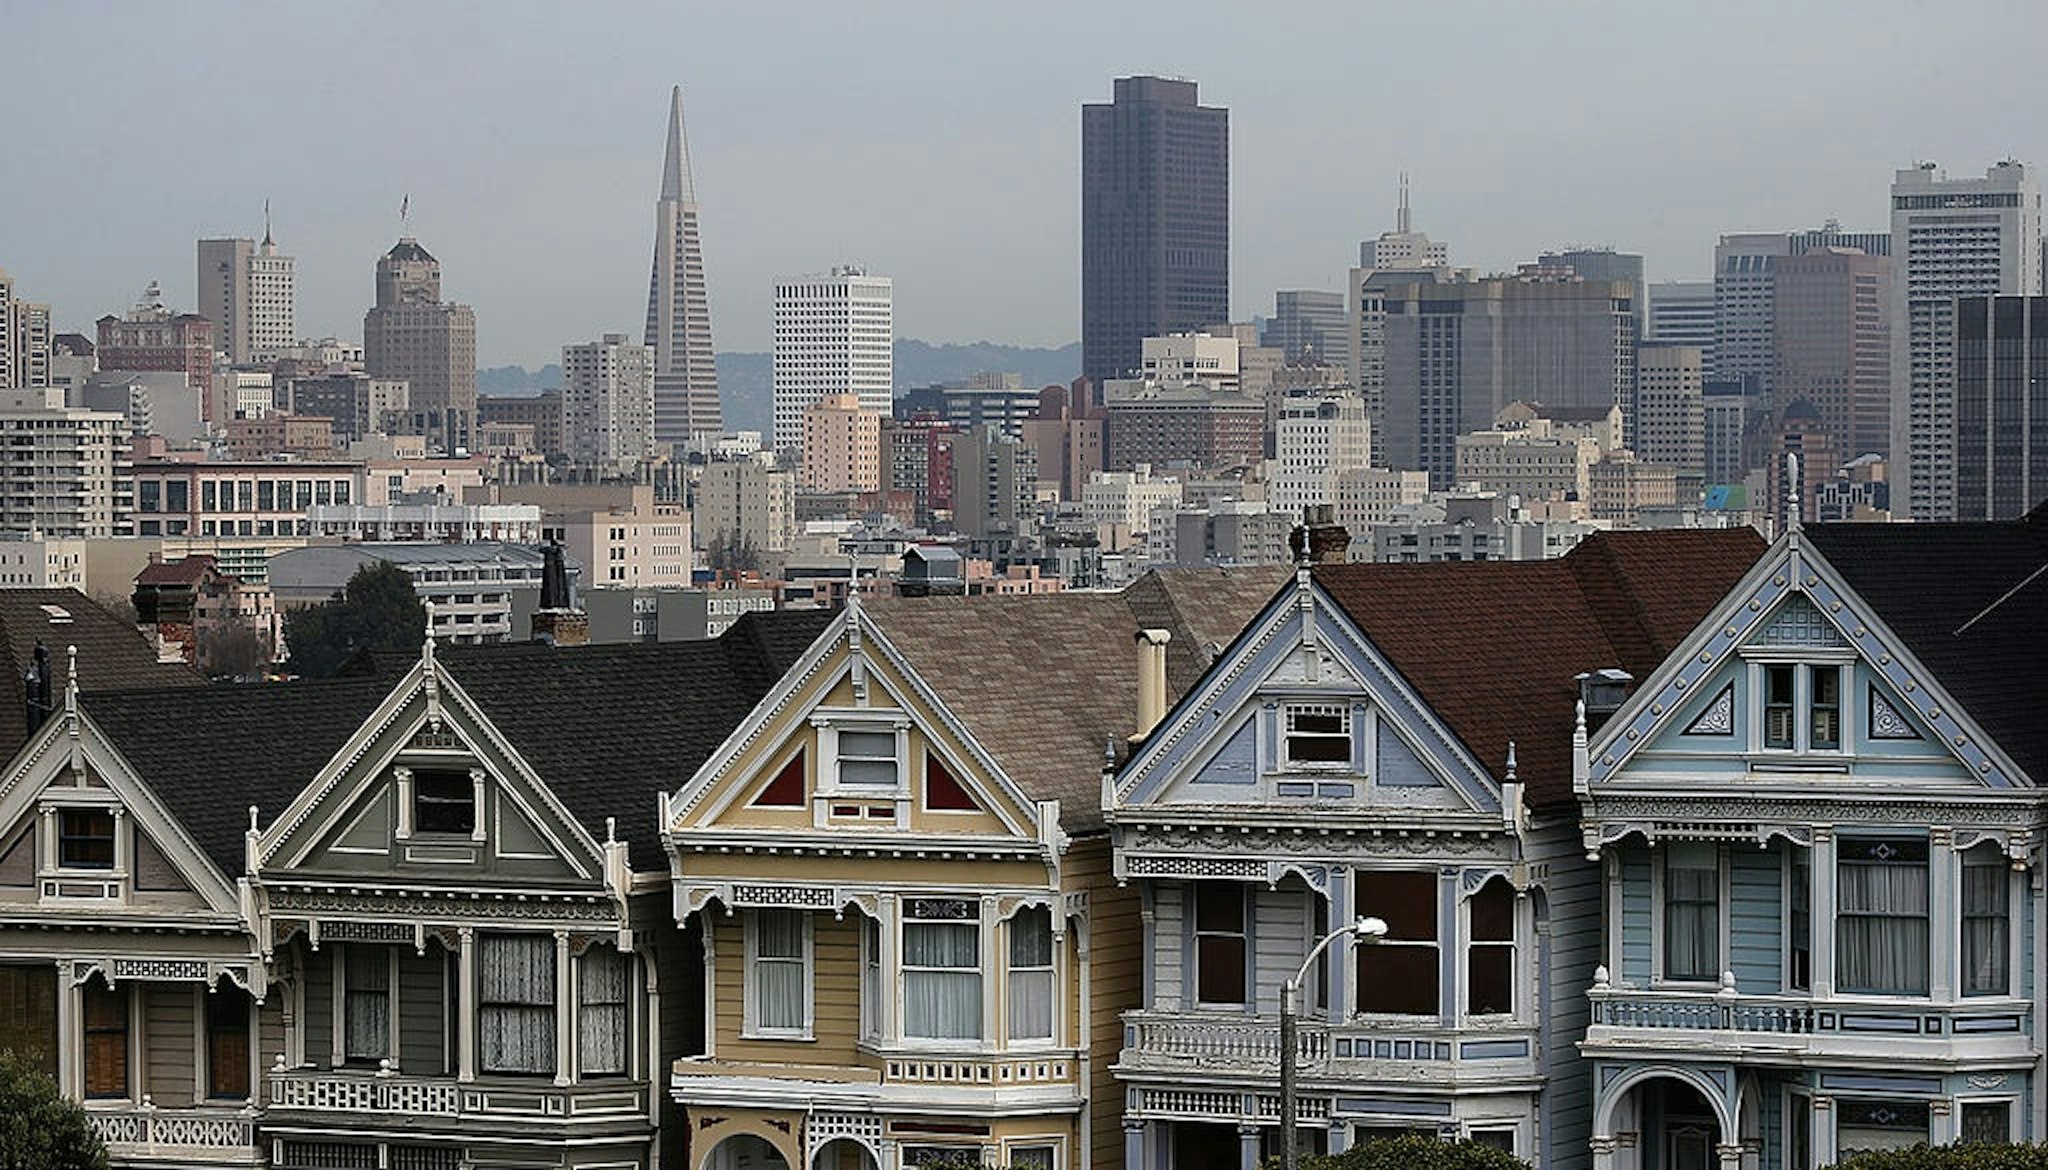 SAN FRANCISCO, CA - FEBRUARY 18: A view of San Francisco's famed Painted Ladies victorian houses on February 18, 2014 in San Francisco, California.